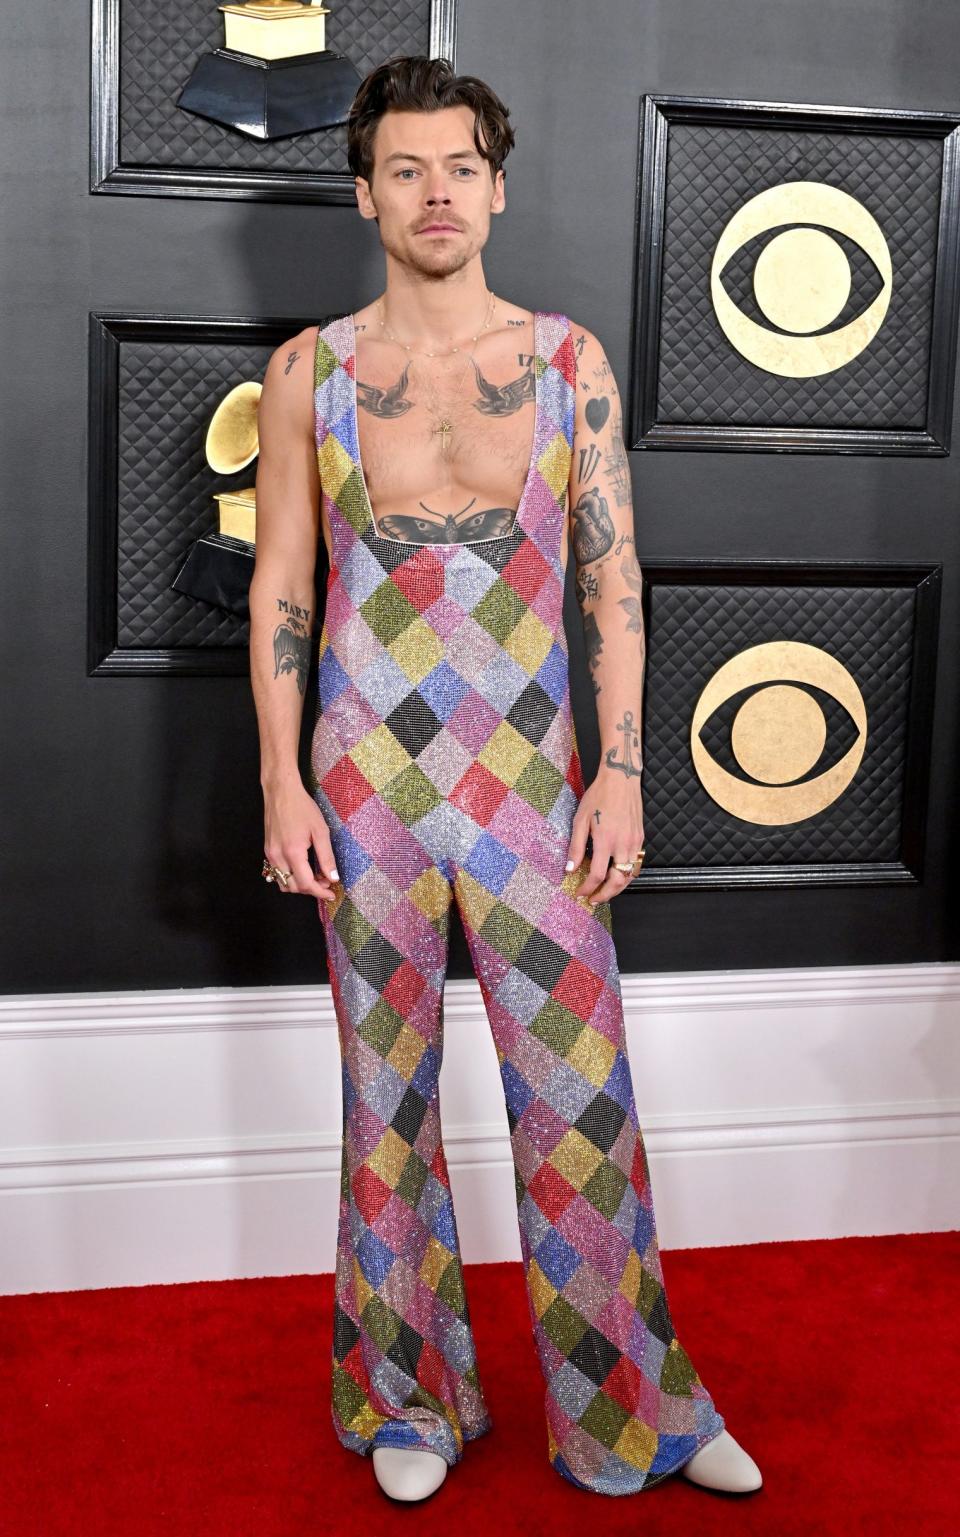 Harry Styles attends the 65th Grammy Awards on February 5 2023 in Los Angeles, California